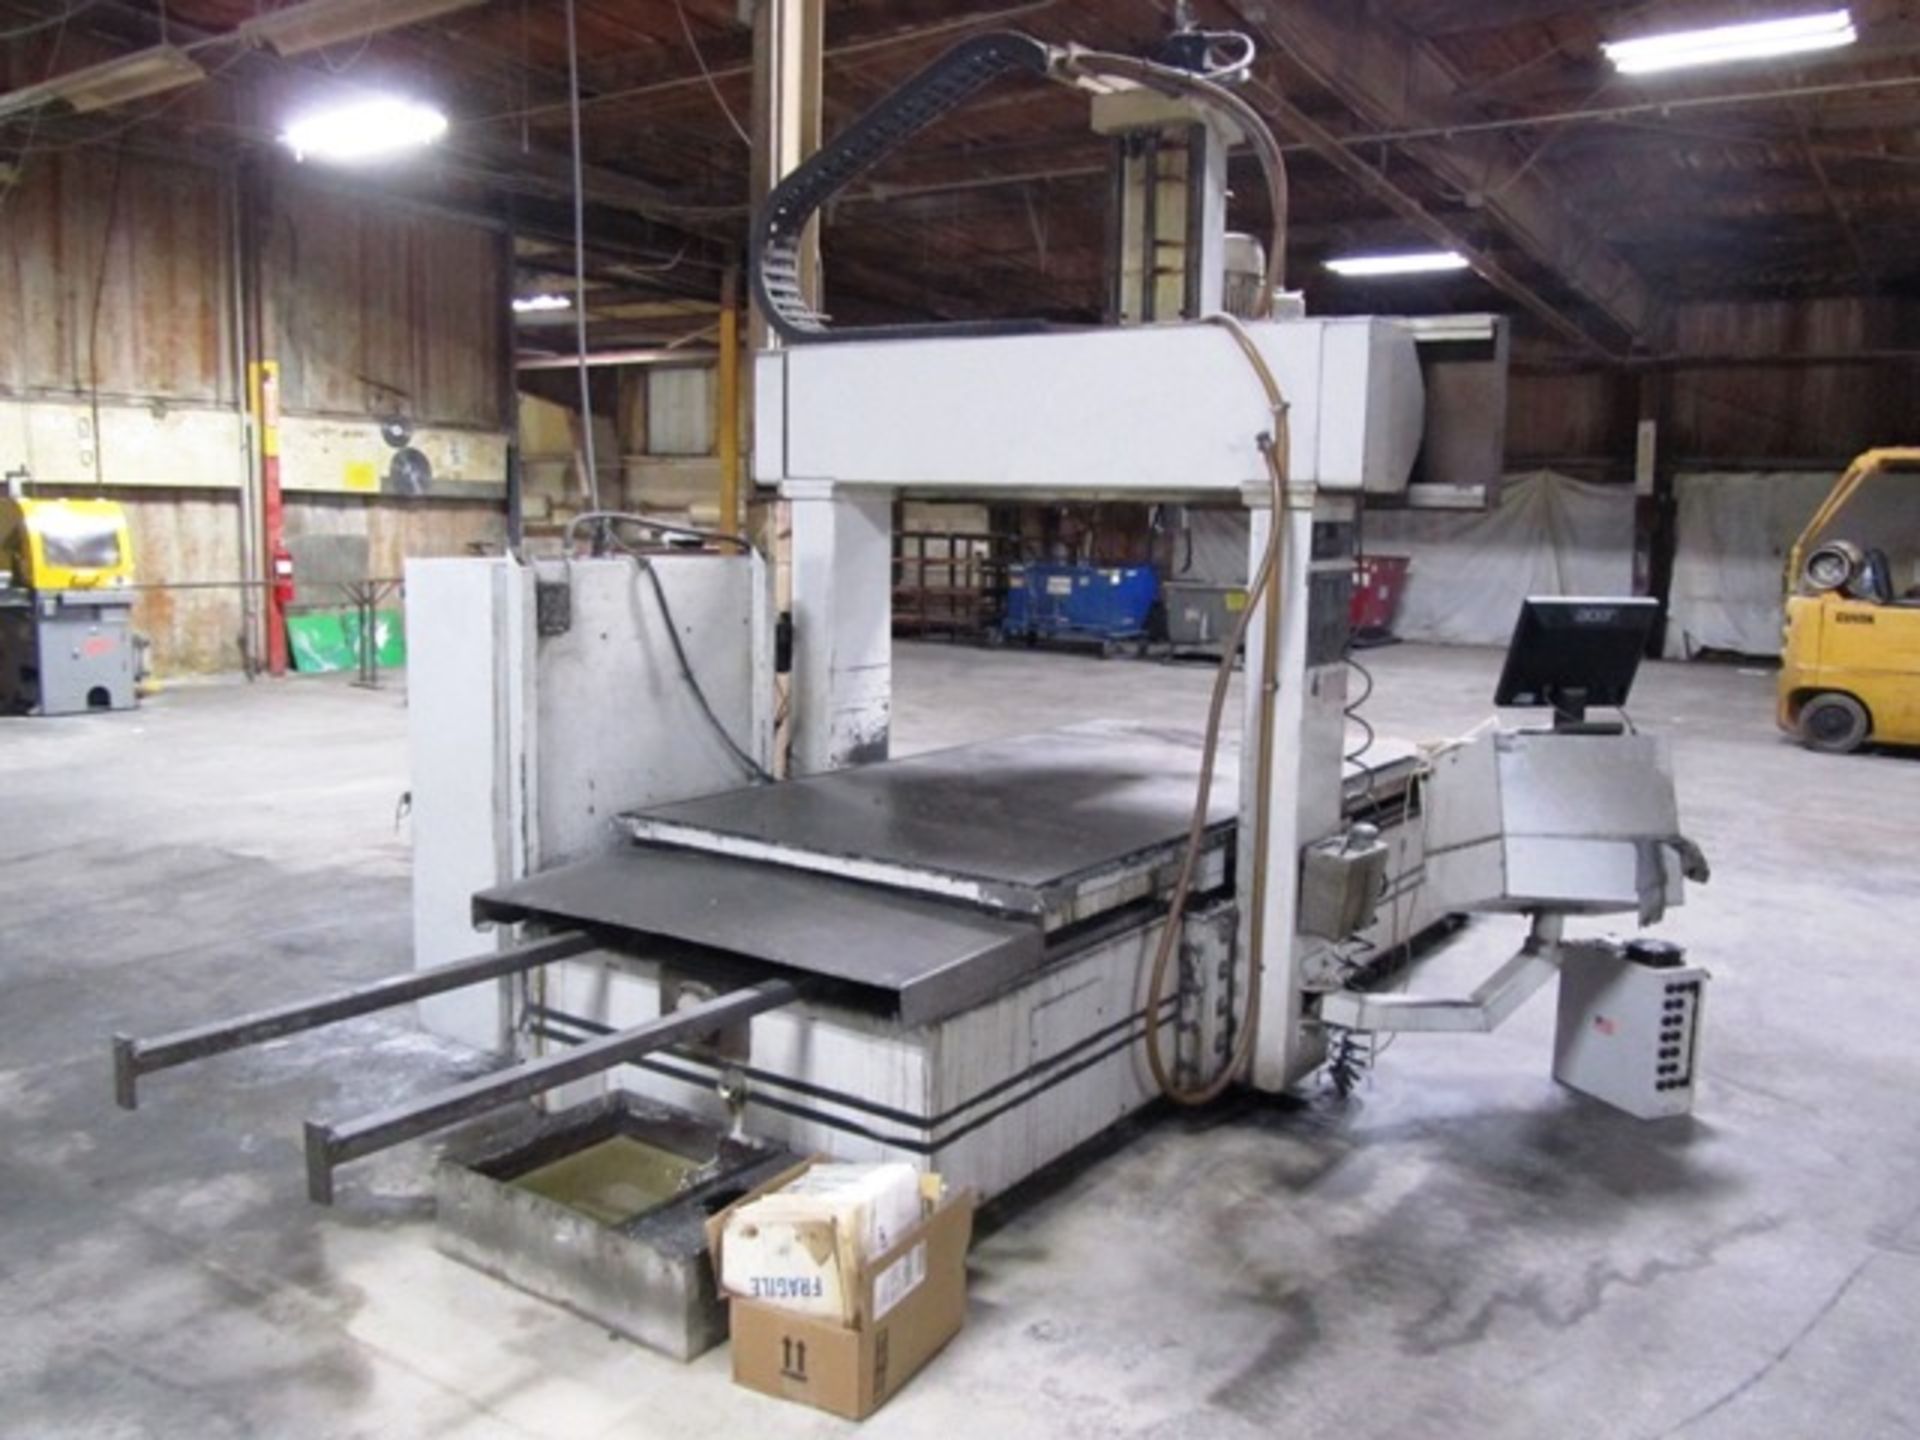 Milltronics BR50 CNC Vertical Bridge Mill with 48'' x 98'' Table, #40 Taper Spindle, 50'' X-Axis - Image 3 of 3